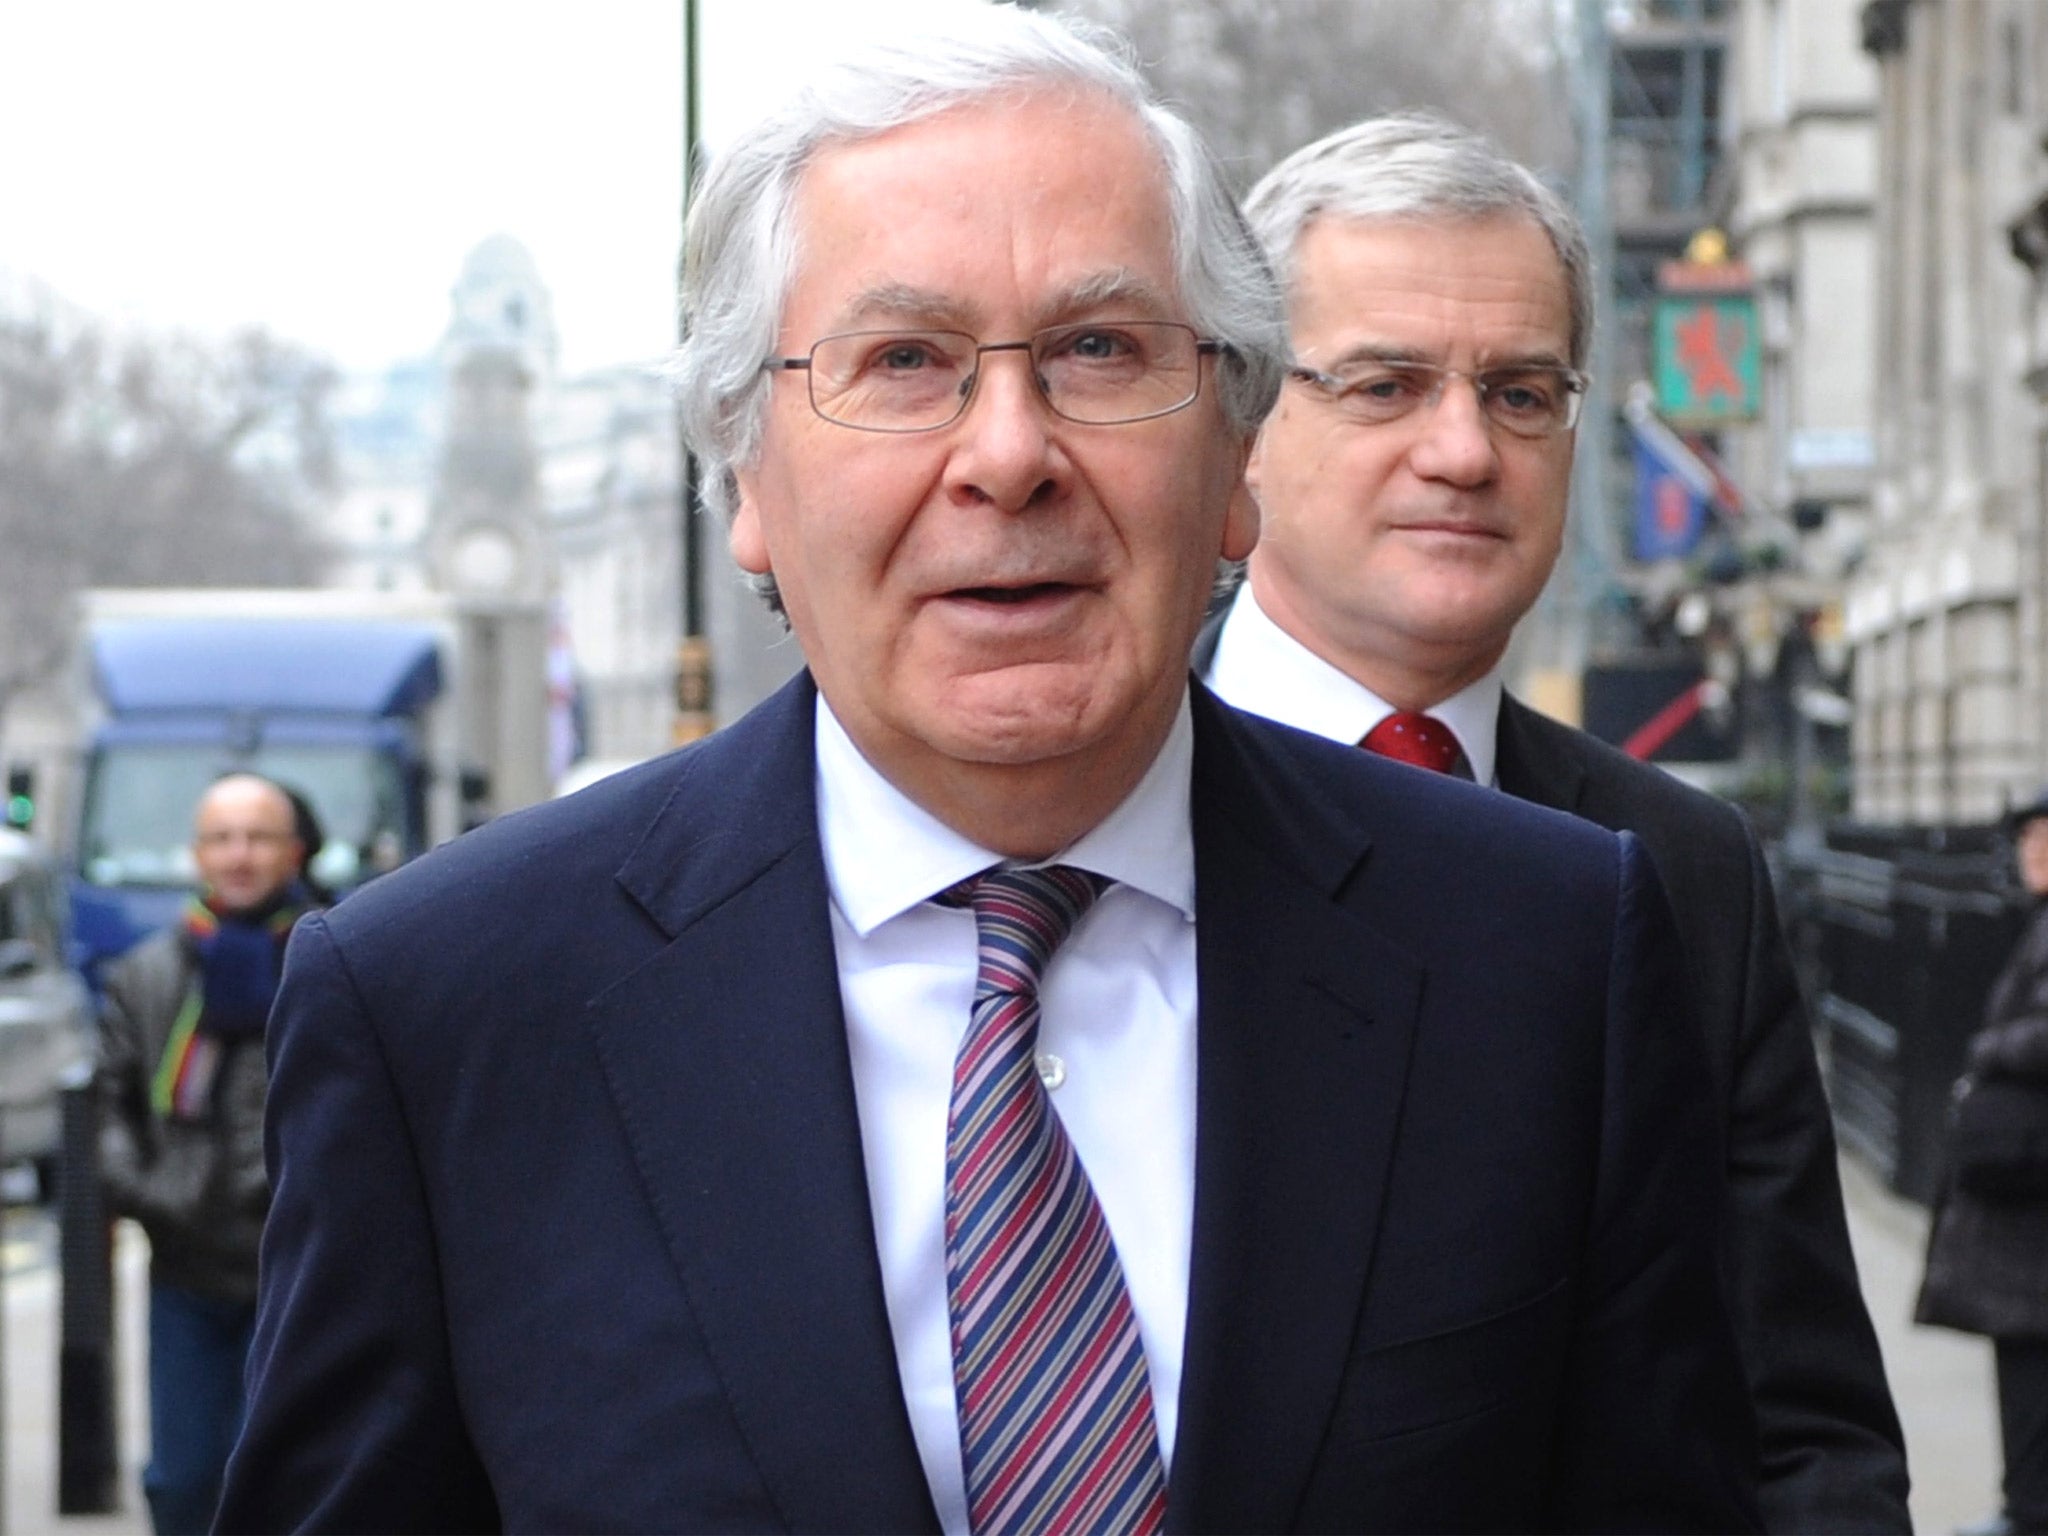 Sir Mervyn King said that ministers needed to stop worrying about the public costs and focus on repairing the lender